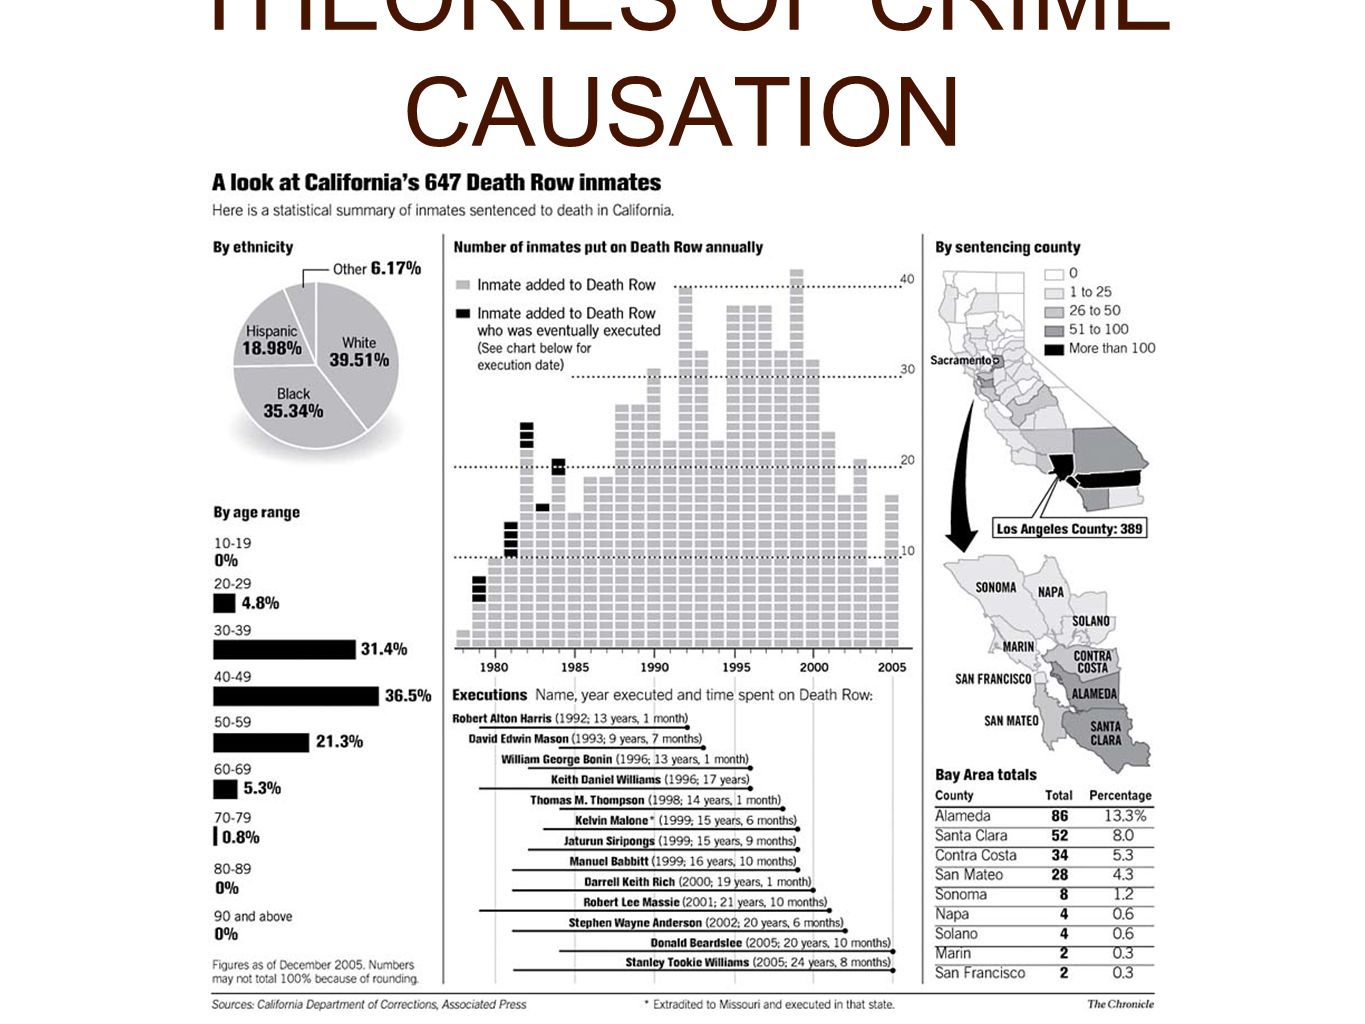 CRIME CAUSATION: SOCIOLOGICAL THEORIES